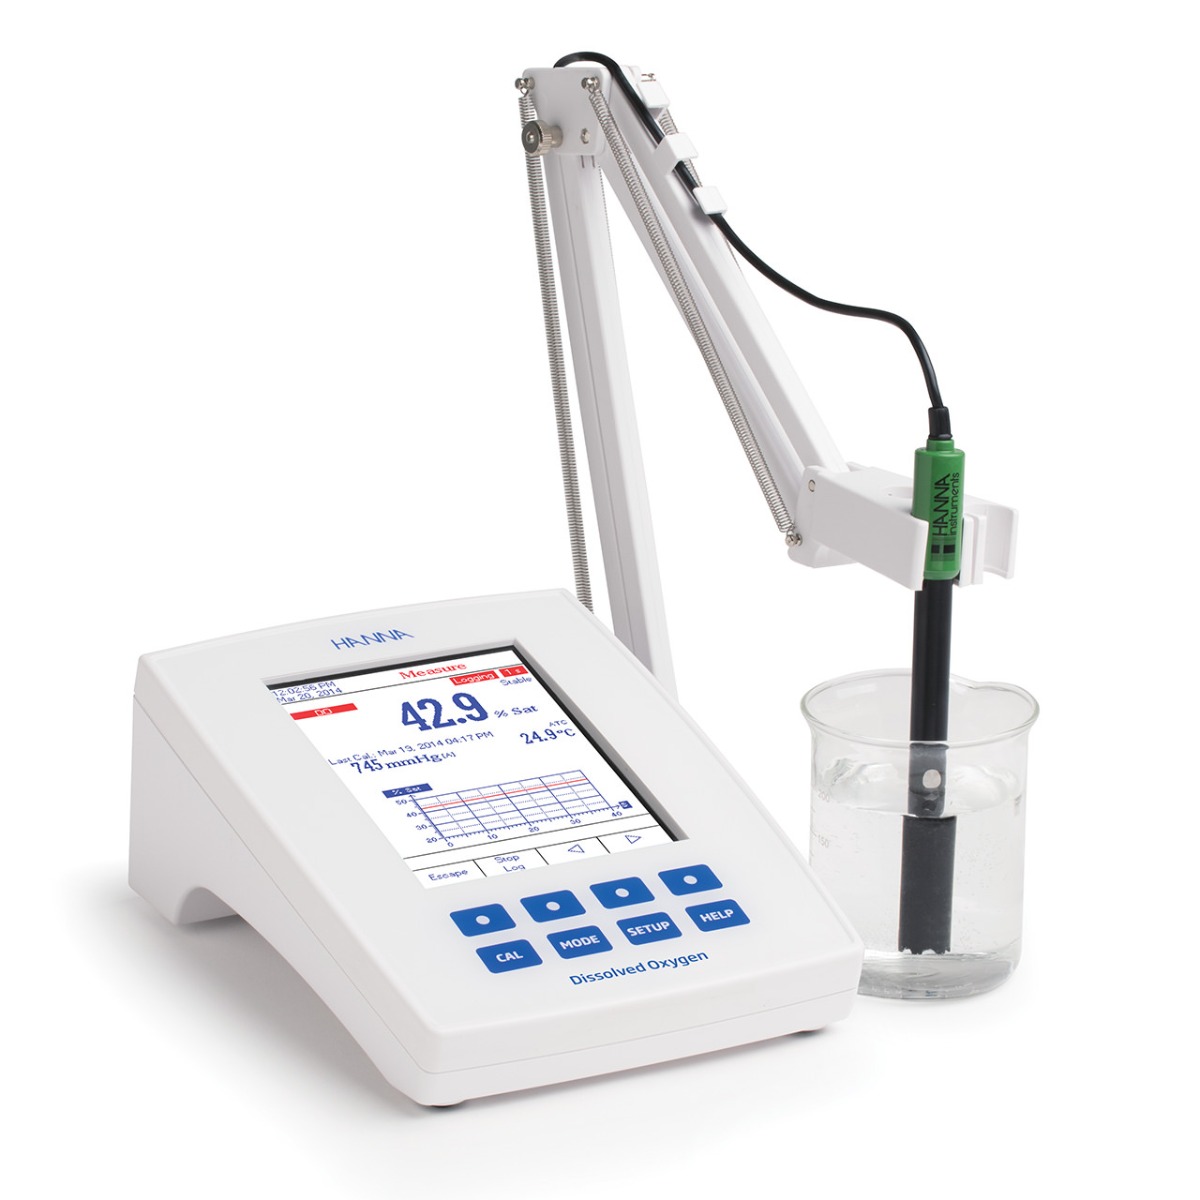 HI5421 Research Grade Dissolved Oxygen and BOD Meter